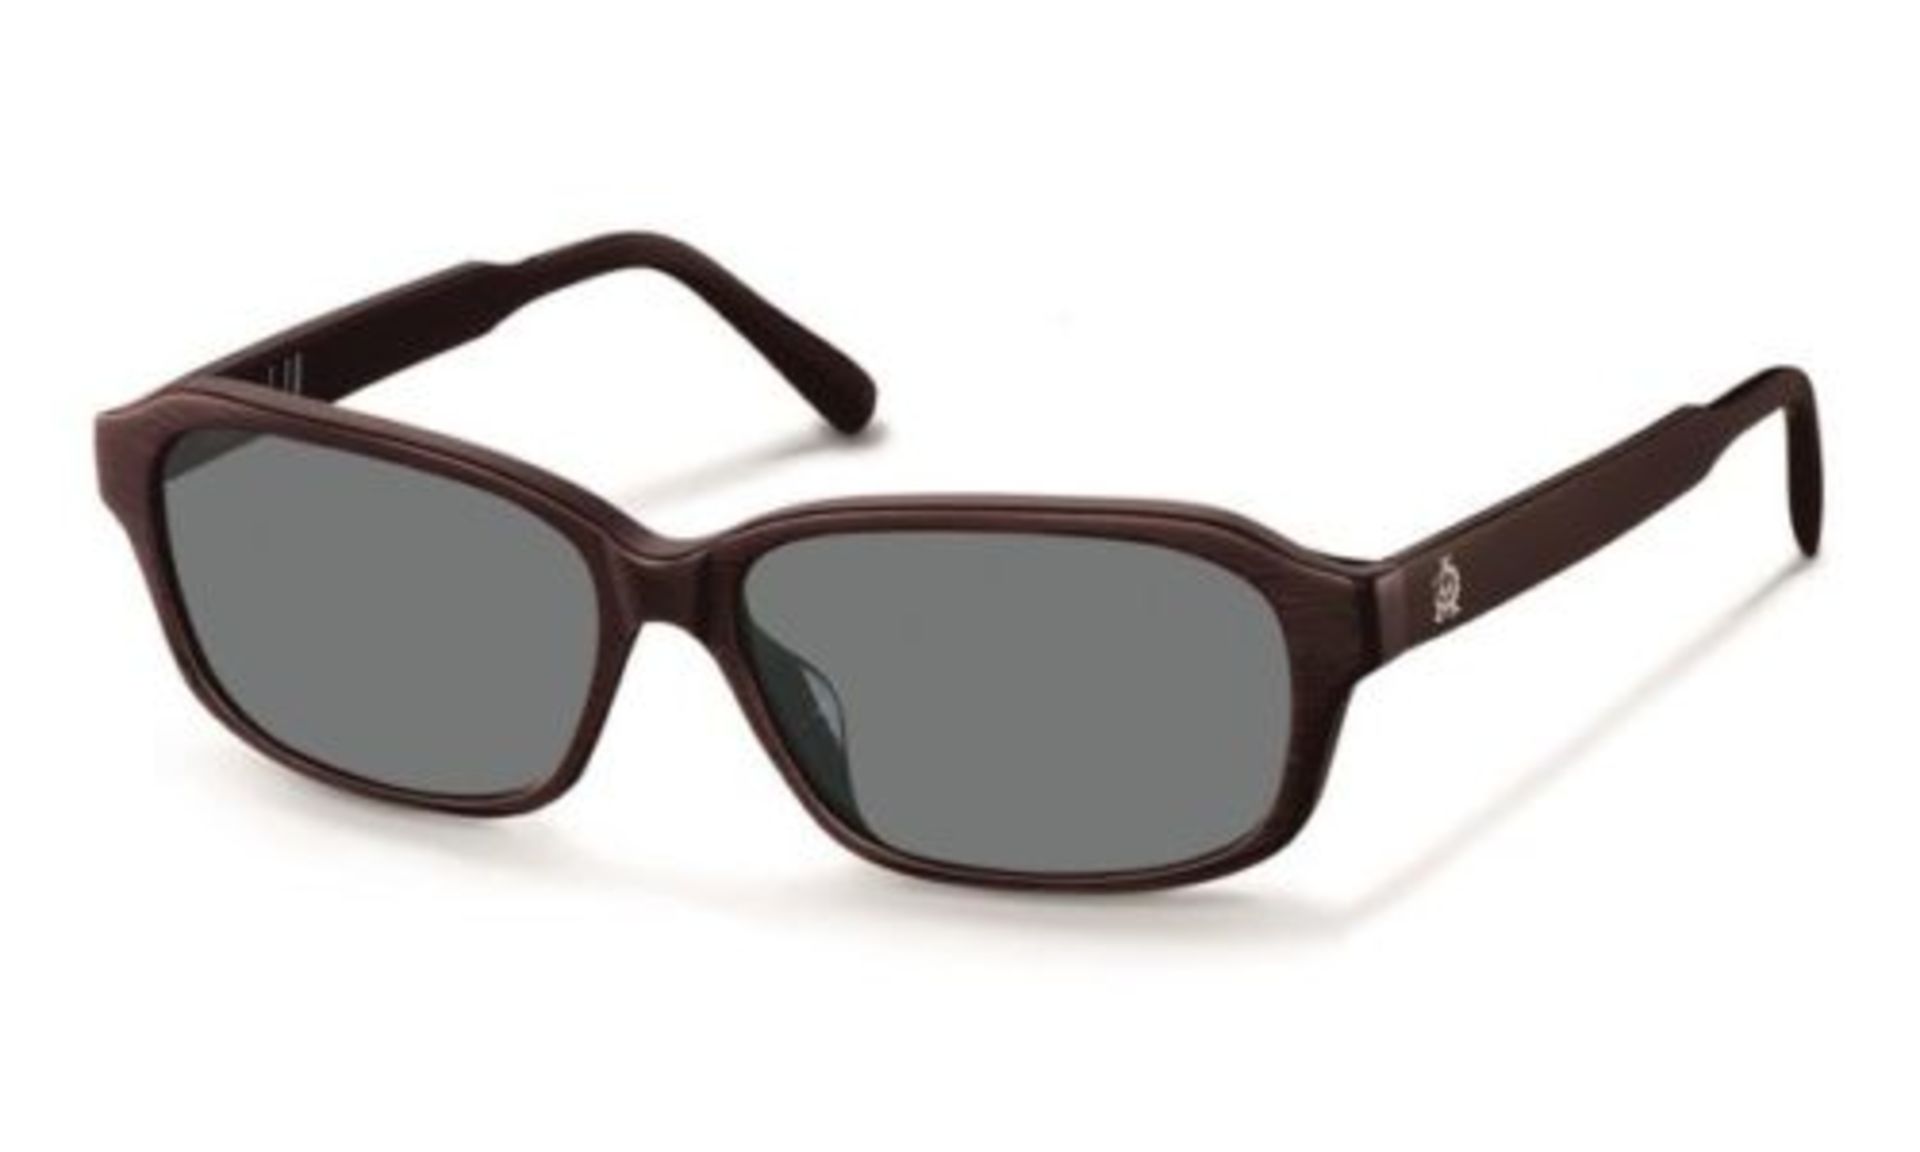 Brand New Pair Of Womens Dunhill Sunglasses - Burgundy Frame With Grey lens RRP: £179.99 D7002-B